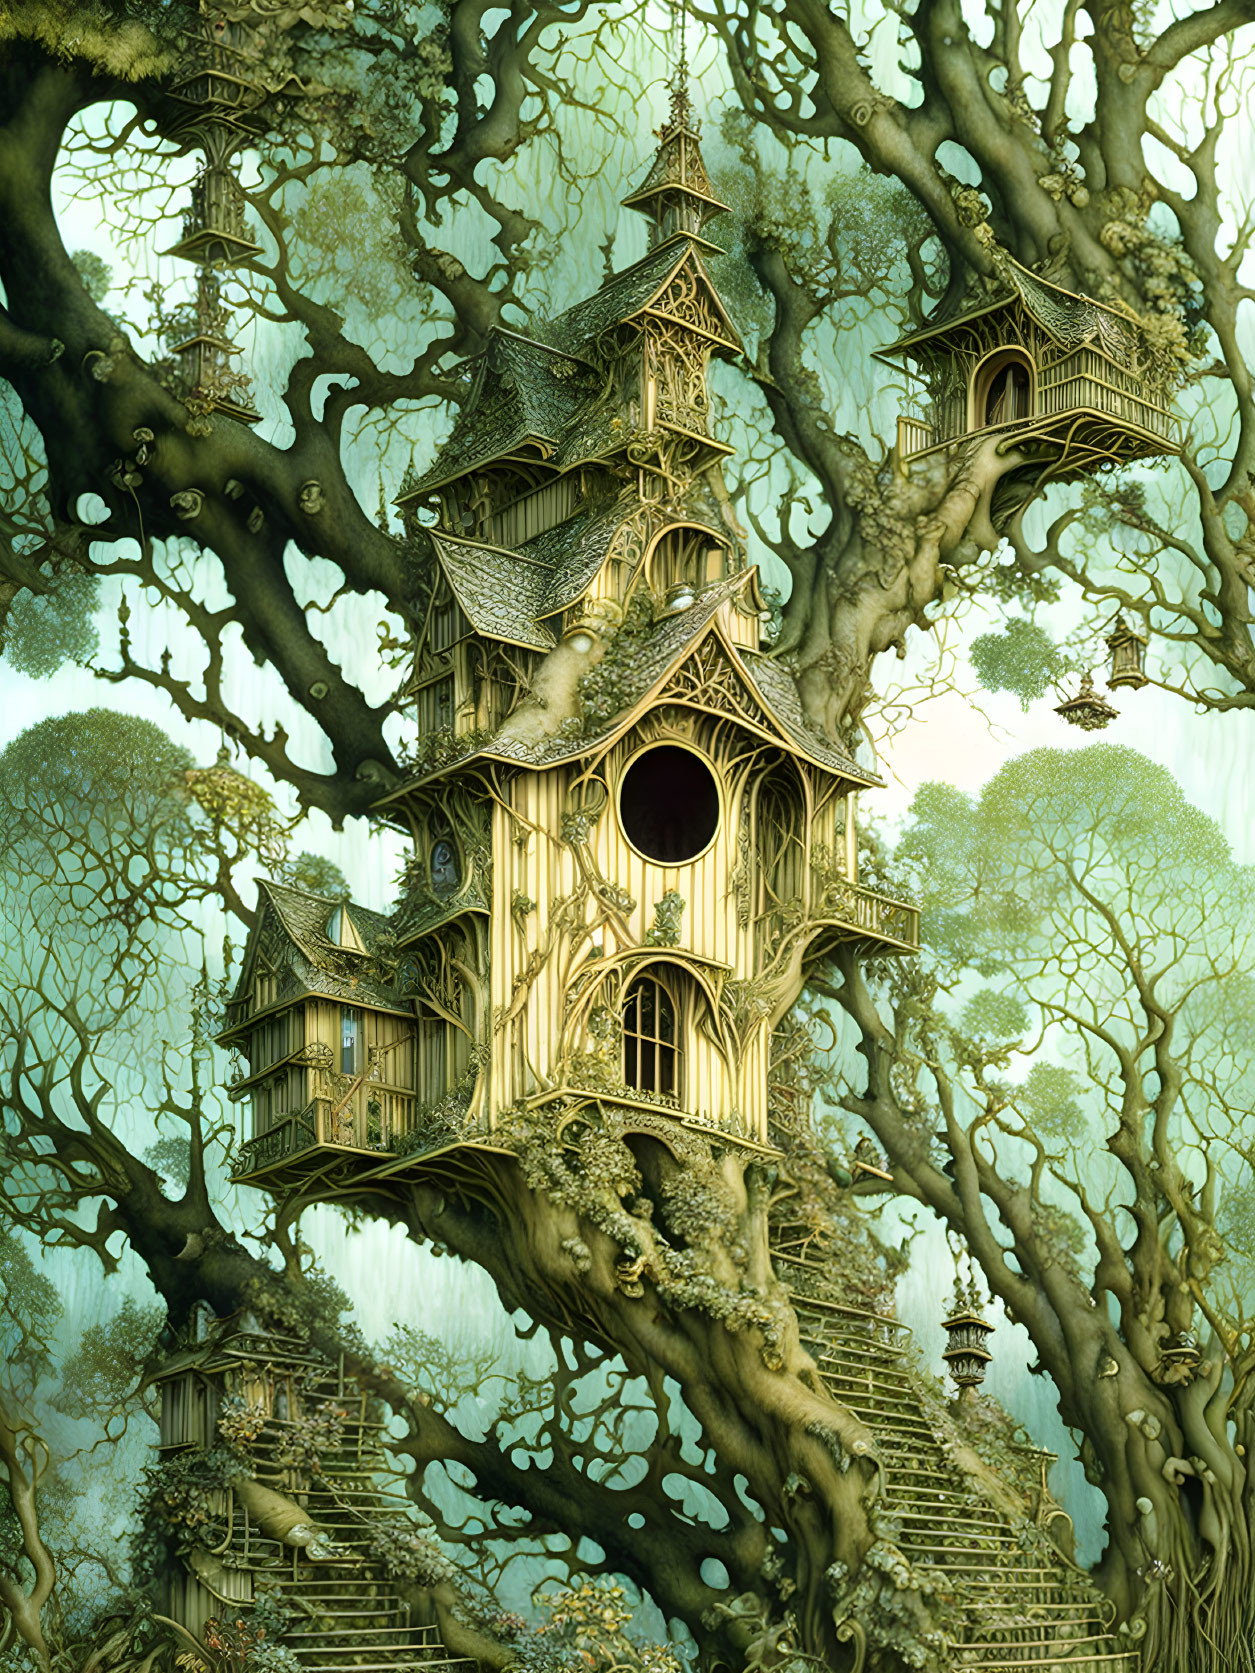 The most Elegant of Tree Houses